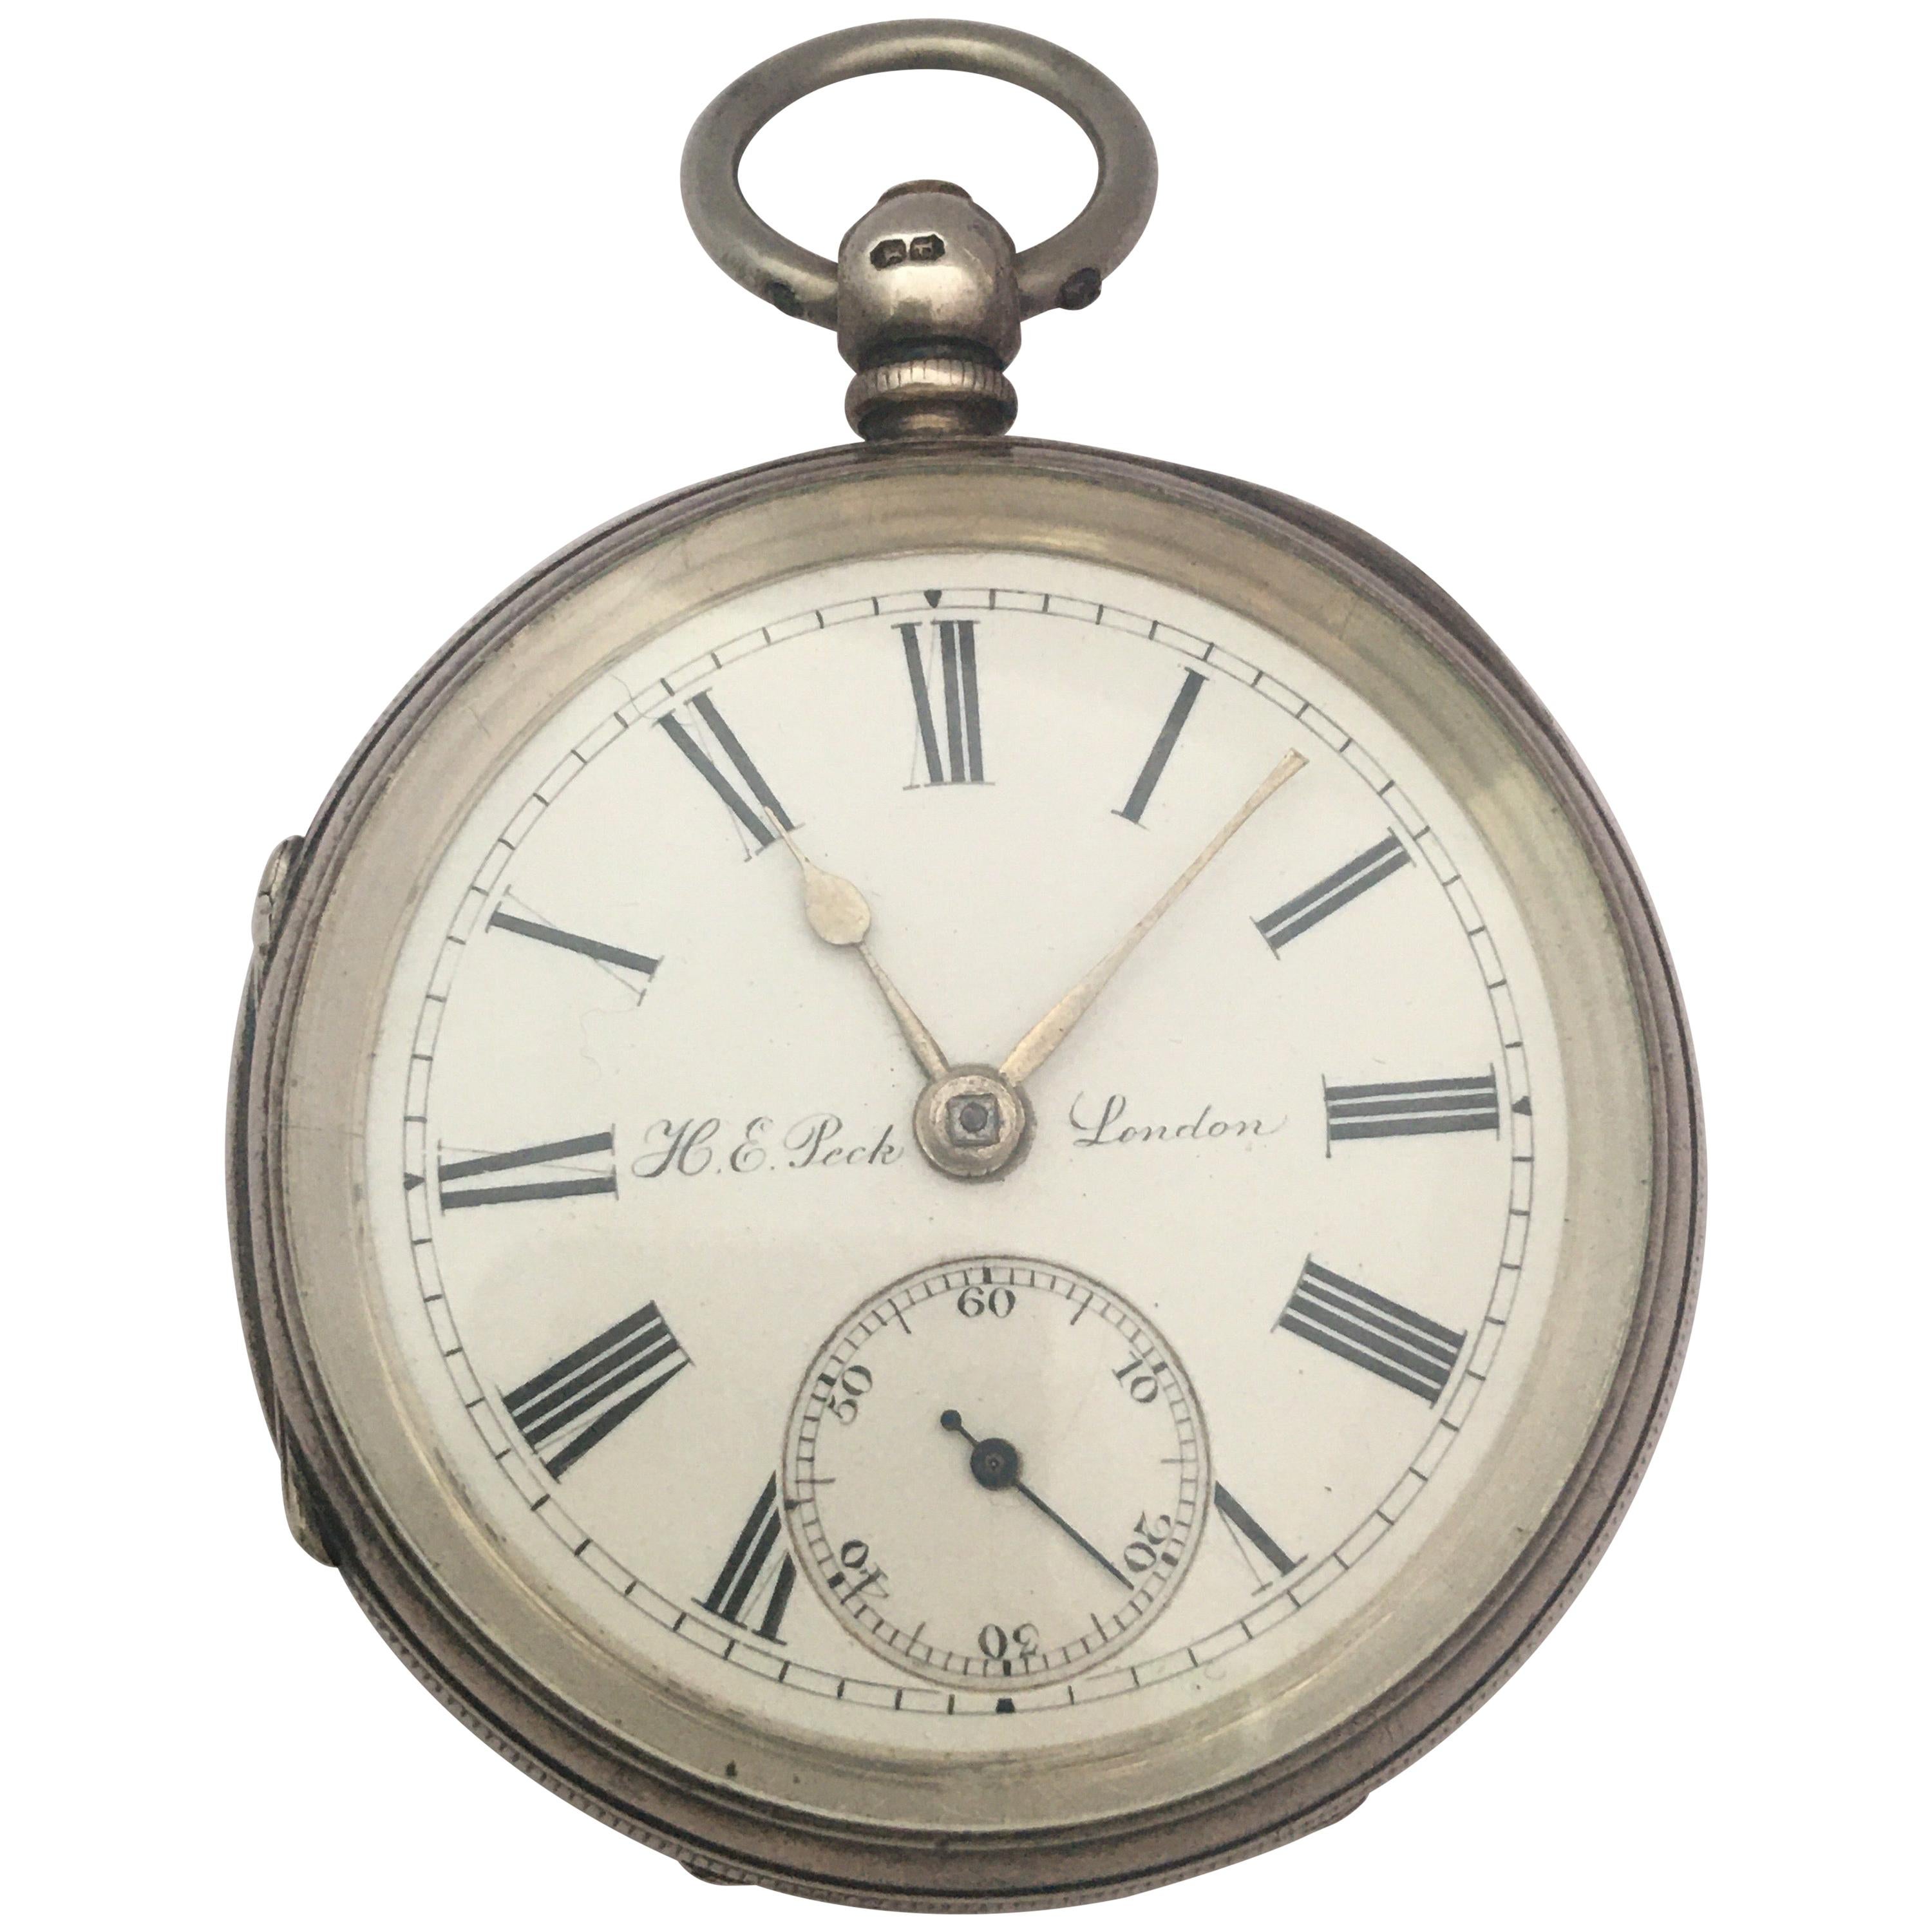 Antique Silver Key Winding Pocket Watch Signed H. E. Peck London For Sale